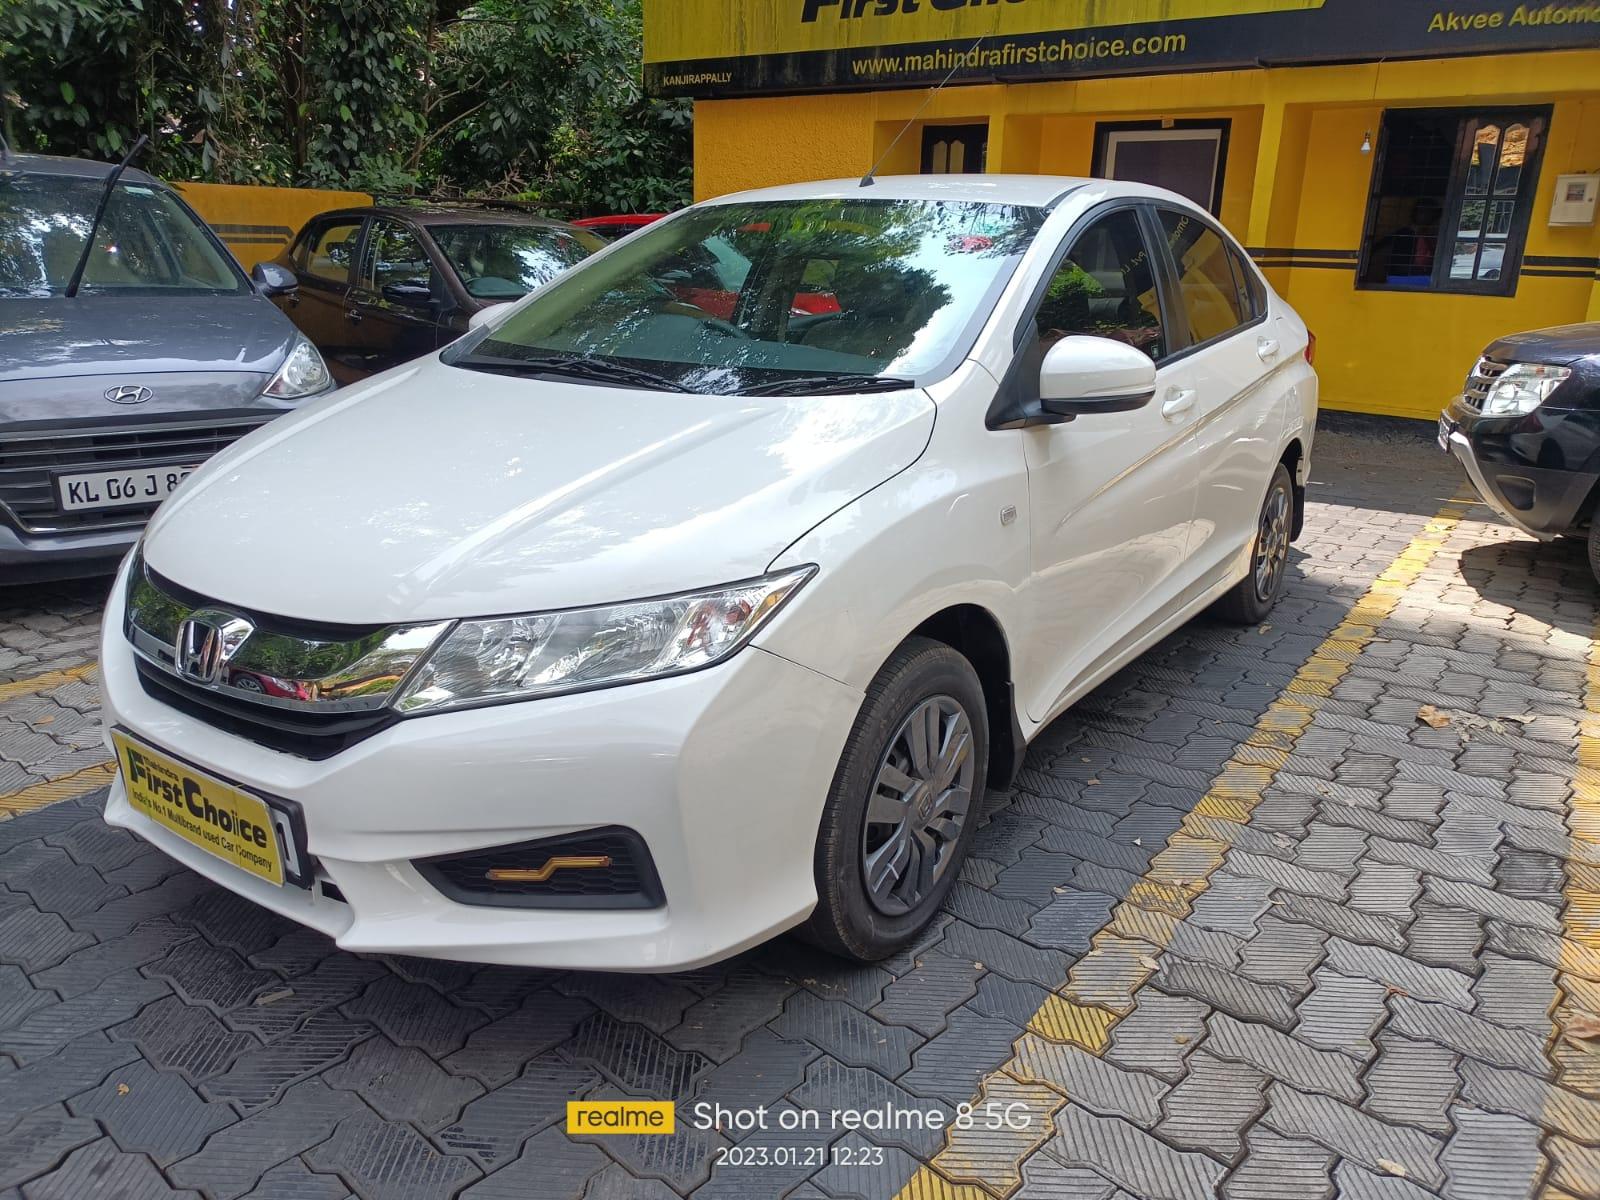 Used 2014 Honda City 1.5 S MT for sale